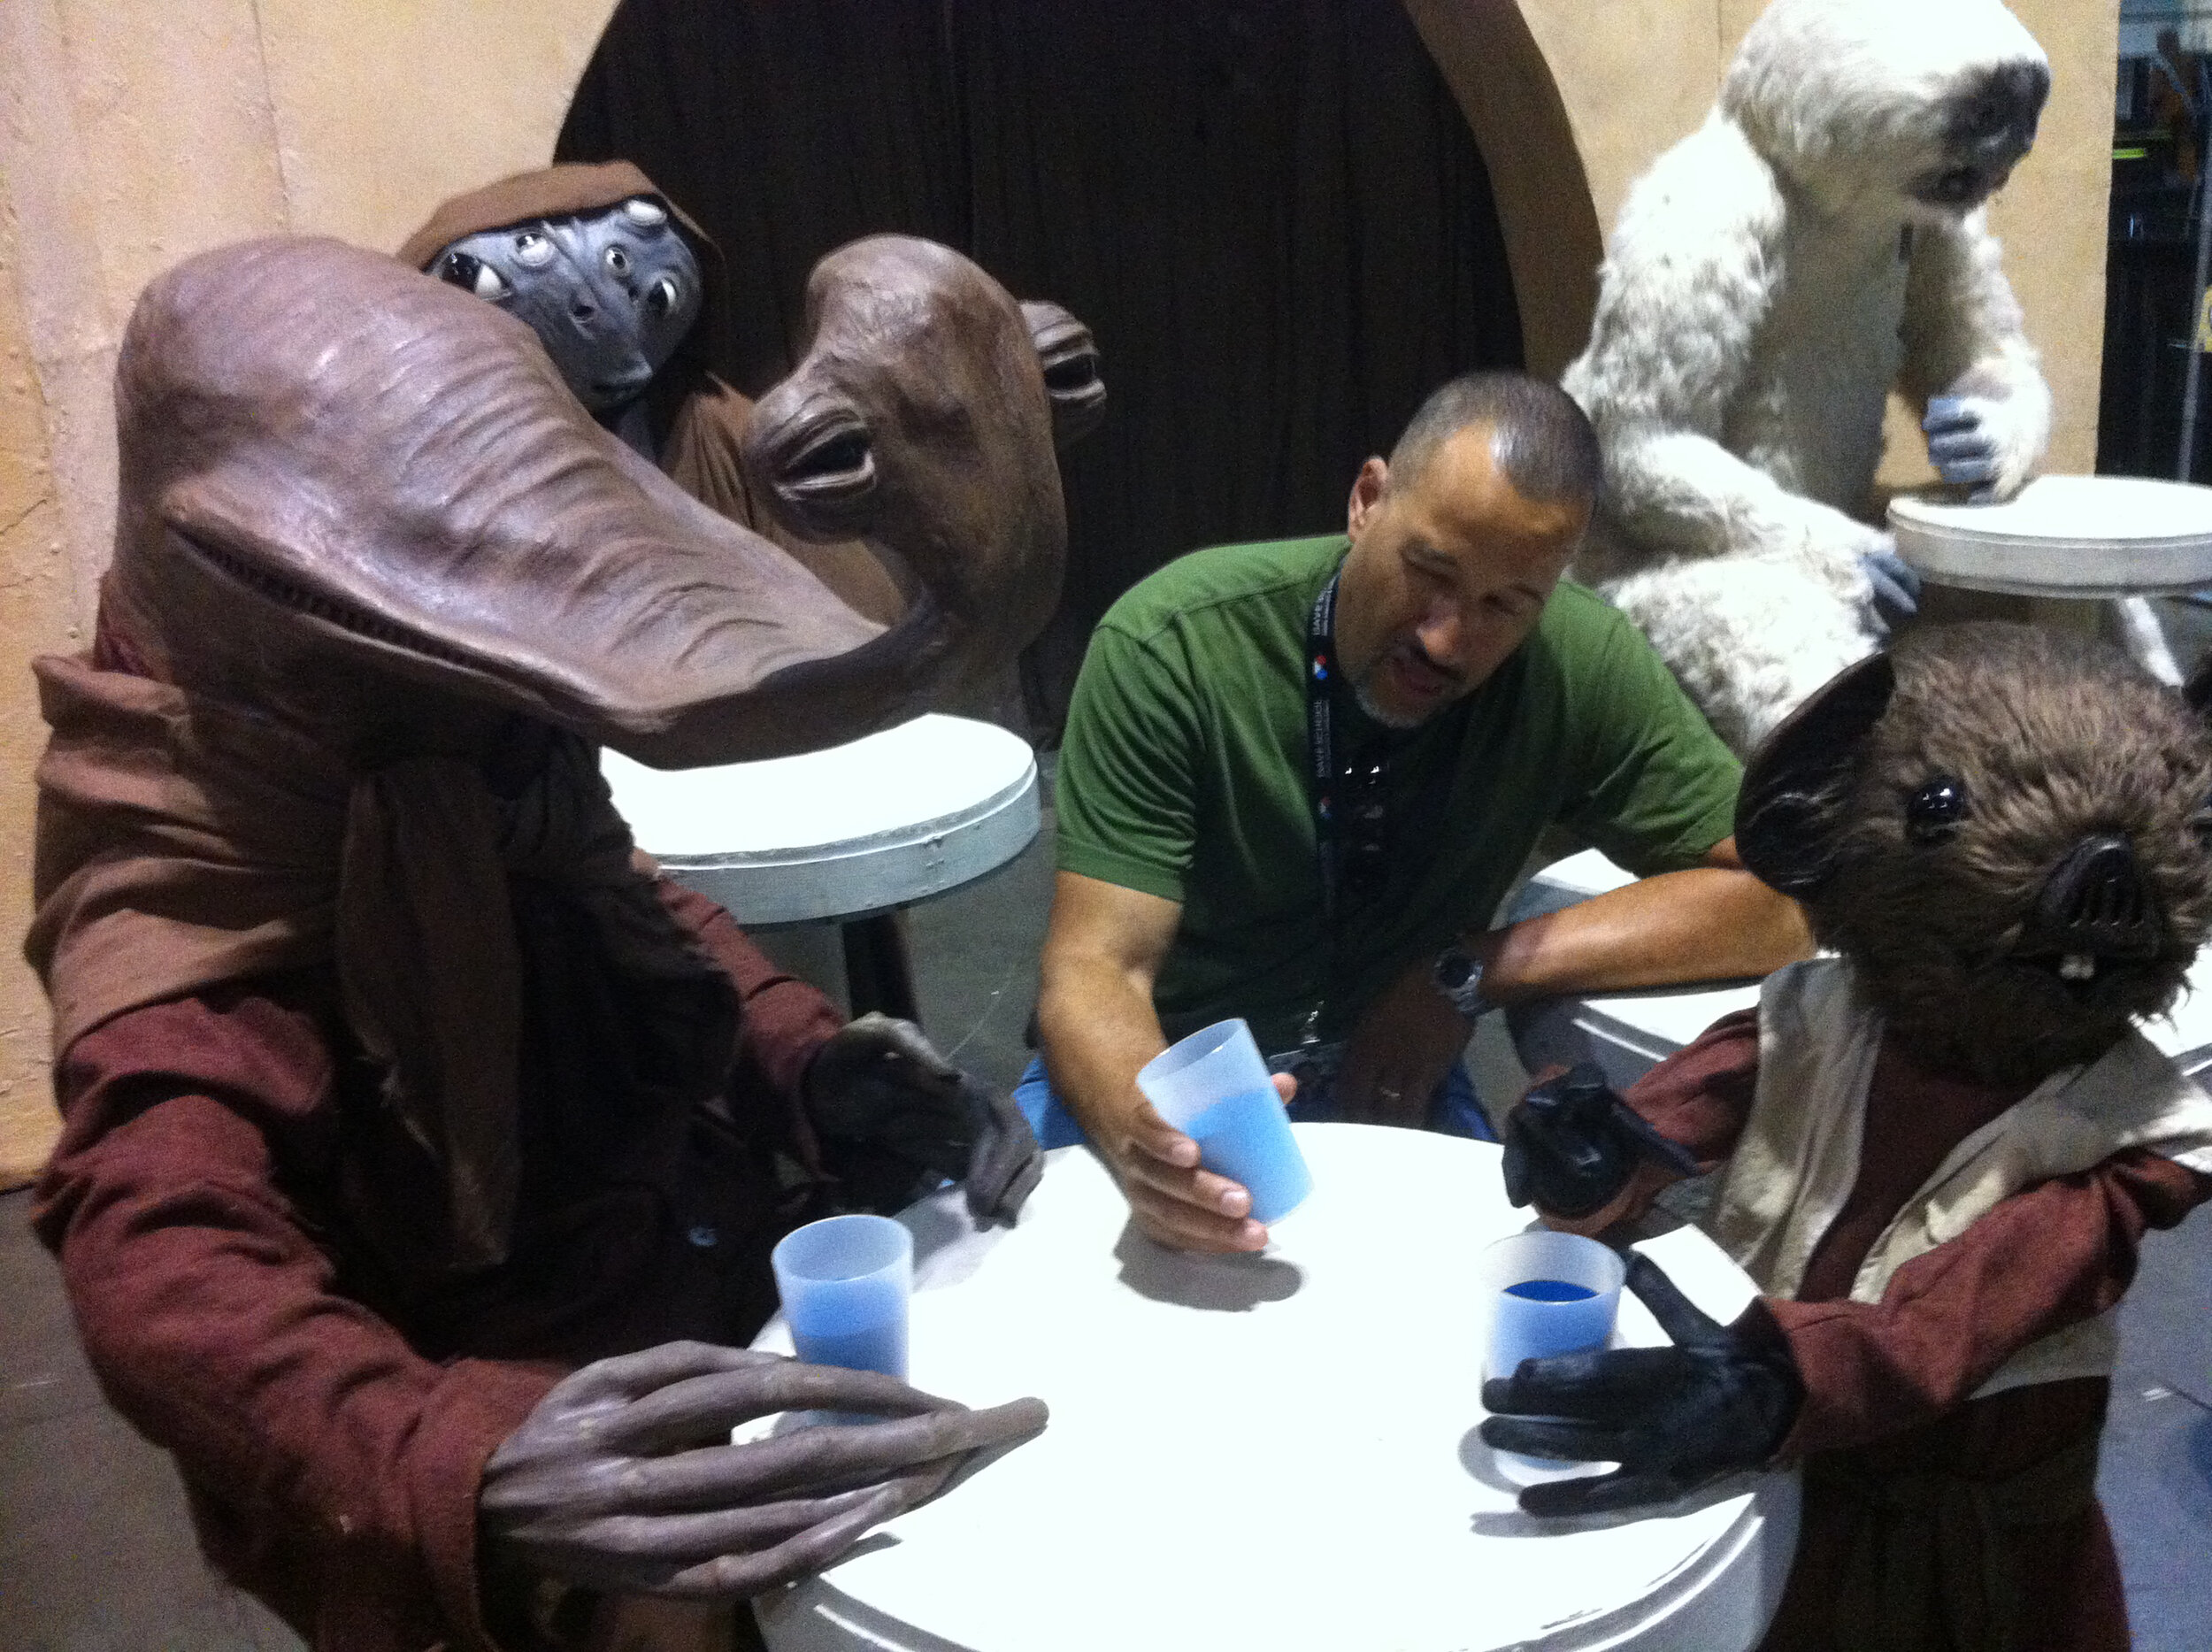  Miles hanging out with fellow musicians in the cantina.  